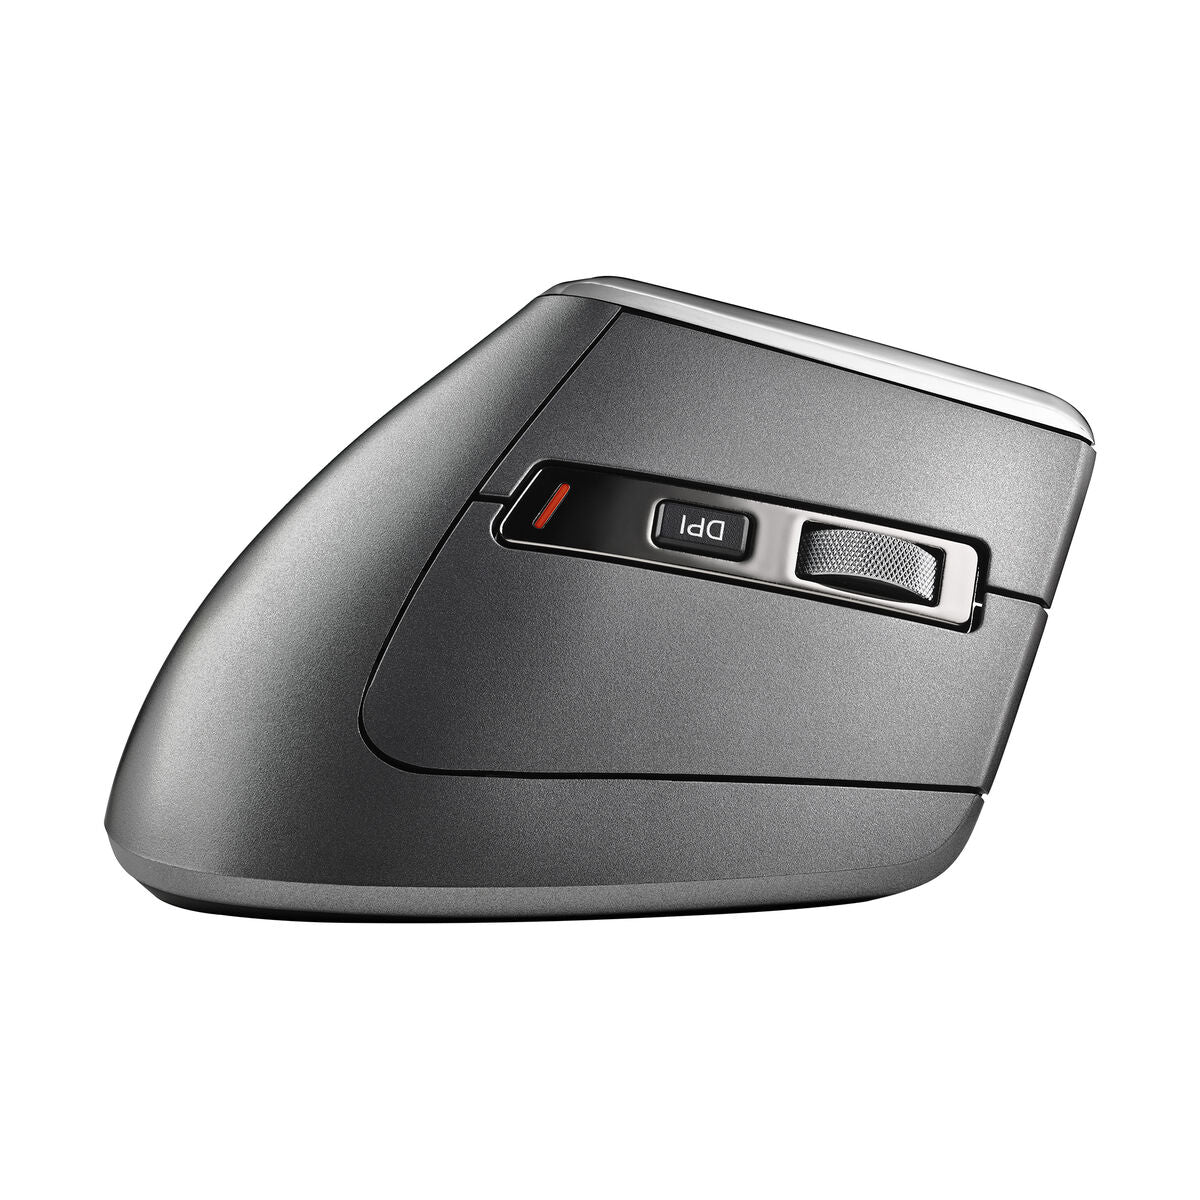 Wireless Mouse NGS EVO KARMA Black 3200 DPI, NGS, Computing, Accessories, wireless-mouse-ngs-evo-karma-black-3200-dpi, Brand_NGS, category-reference-2609, category-reference-2642, category-reference-2656, category-reference-t-19685, category-reference-t-19908, category-reference-t-21353, category-reference-t-25626, computers / peripherals, Condition_NEW, office, Price_50 - 100, Teleworking, RiotNook